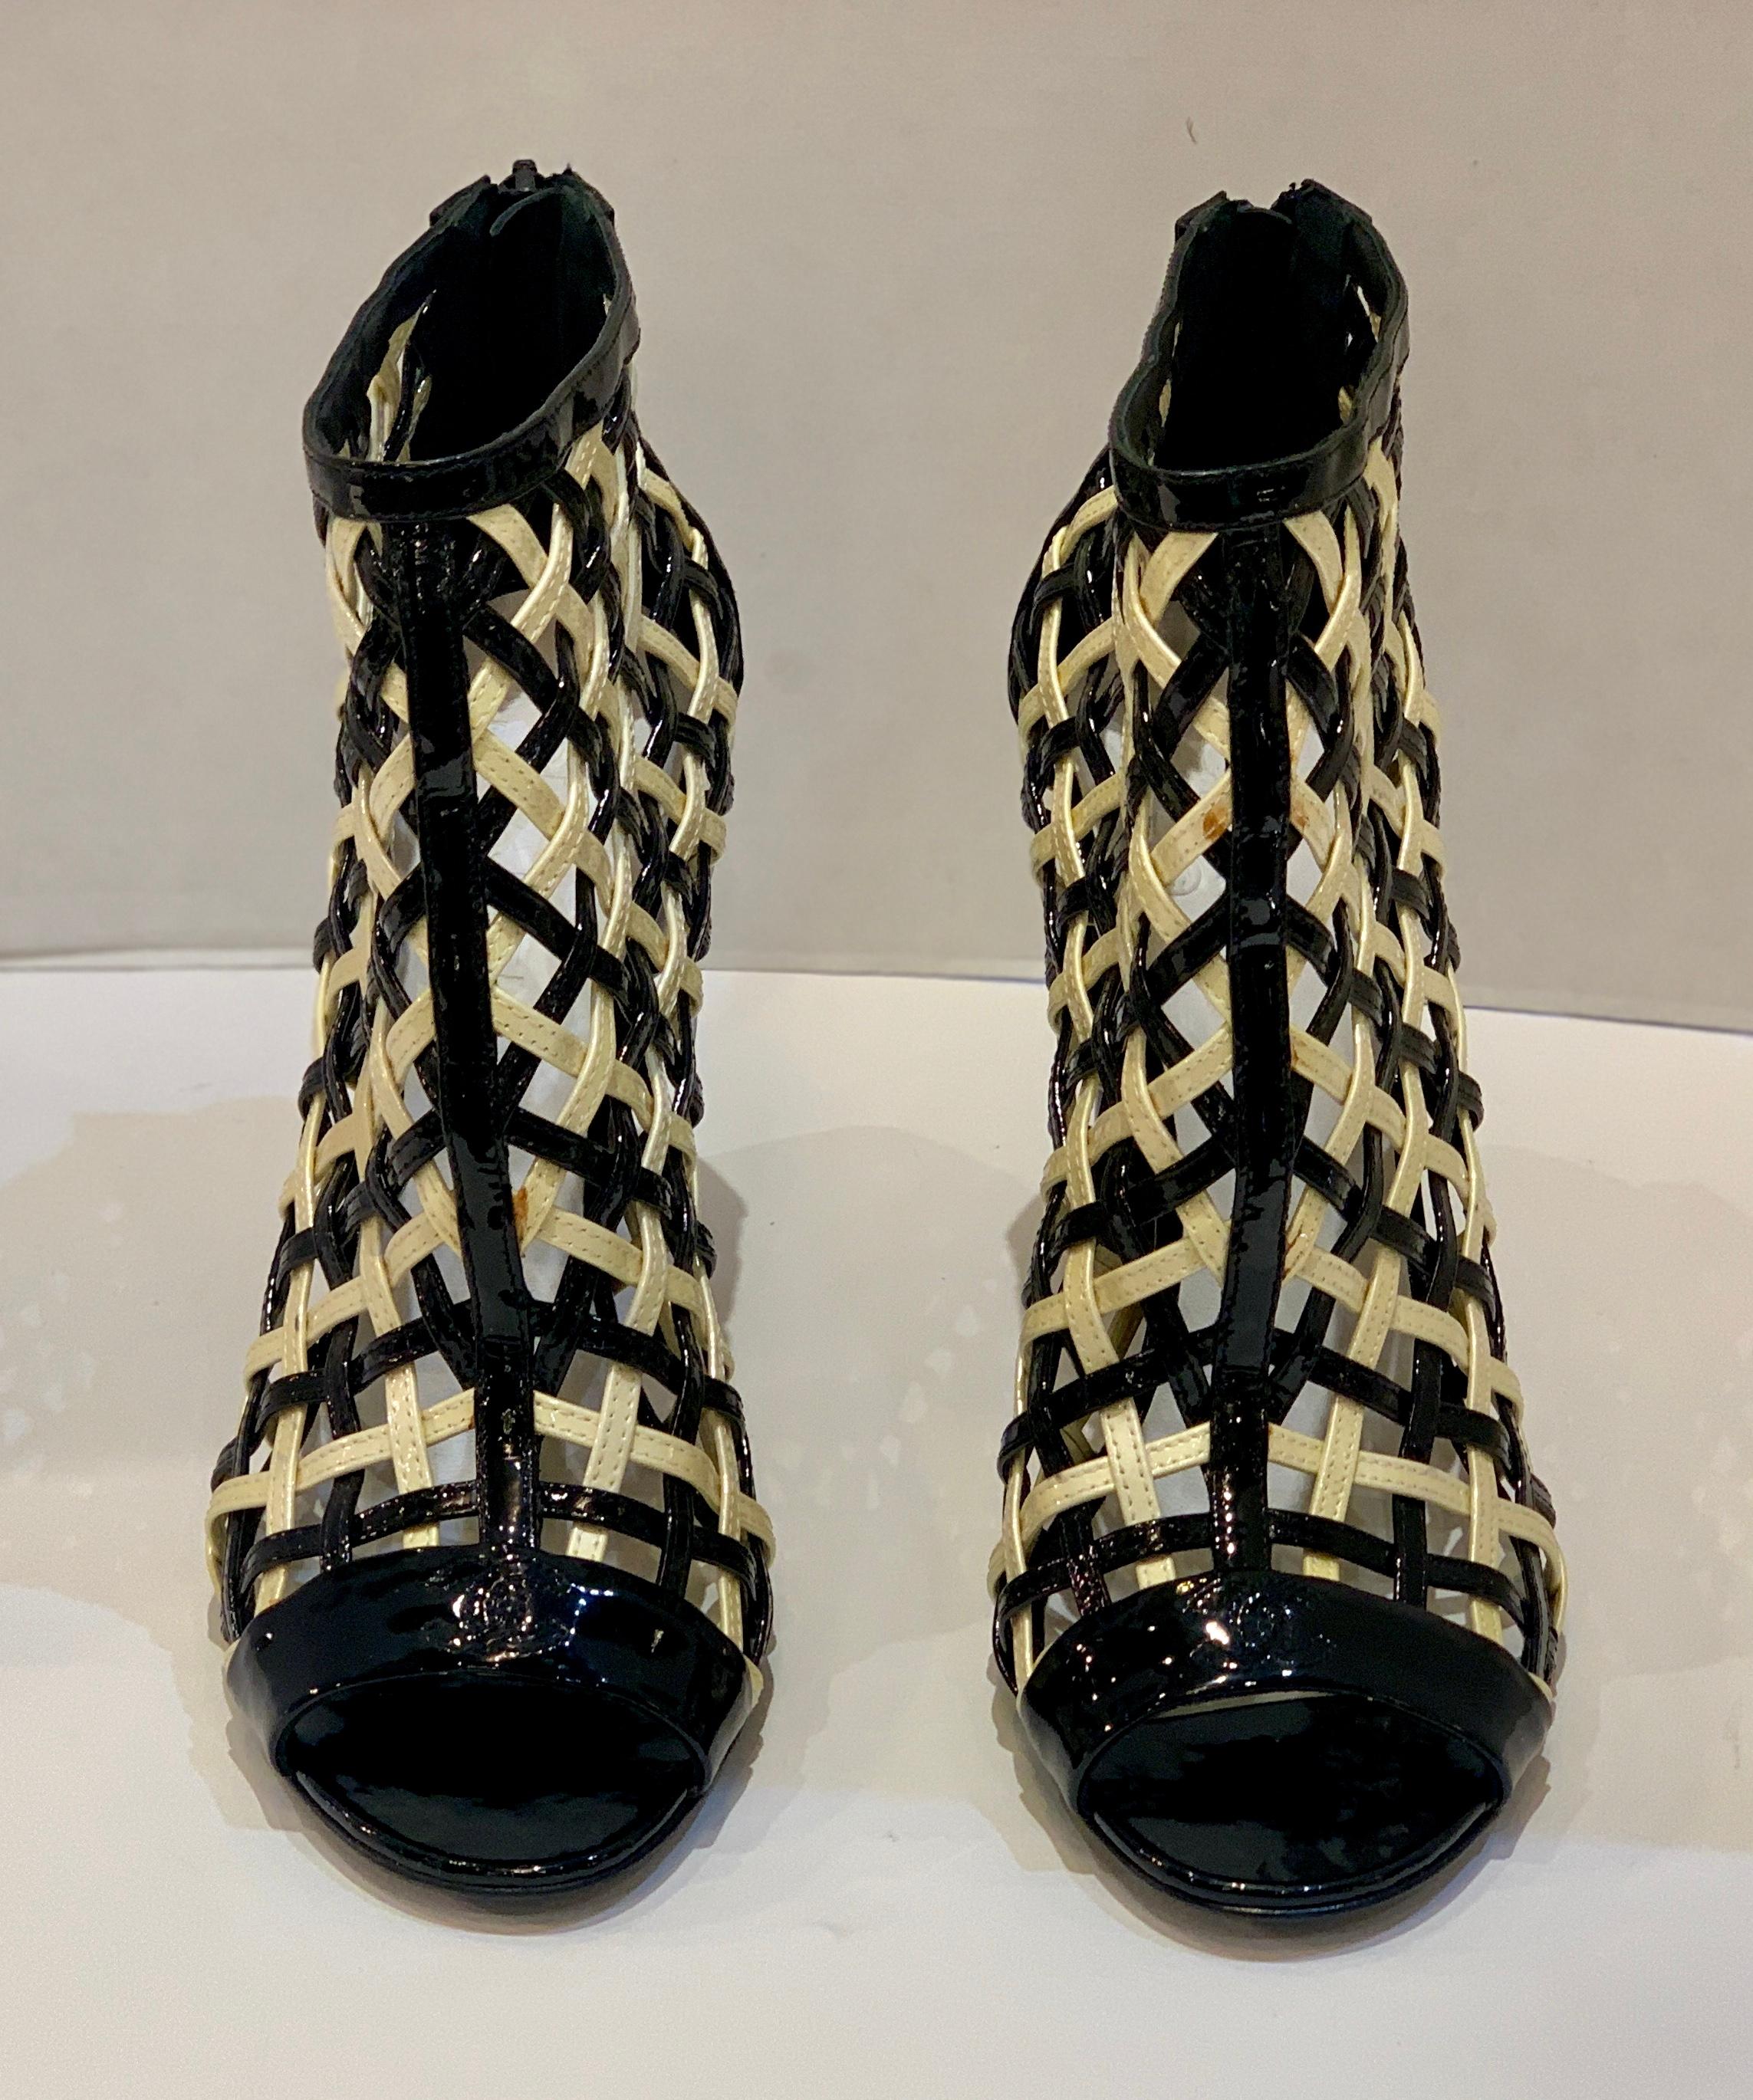 Chanel Black and White Patent Leather Cage Peep Toe Booties Shoes Size 41 or 11 In Good Condition For Sale In Tustin, CA